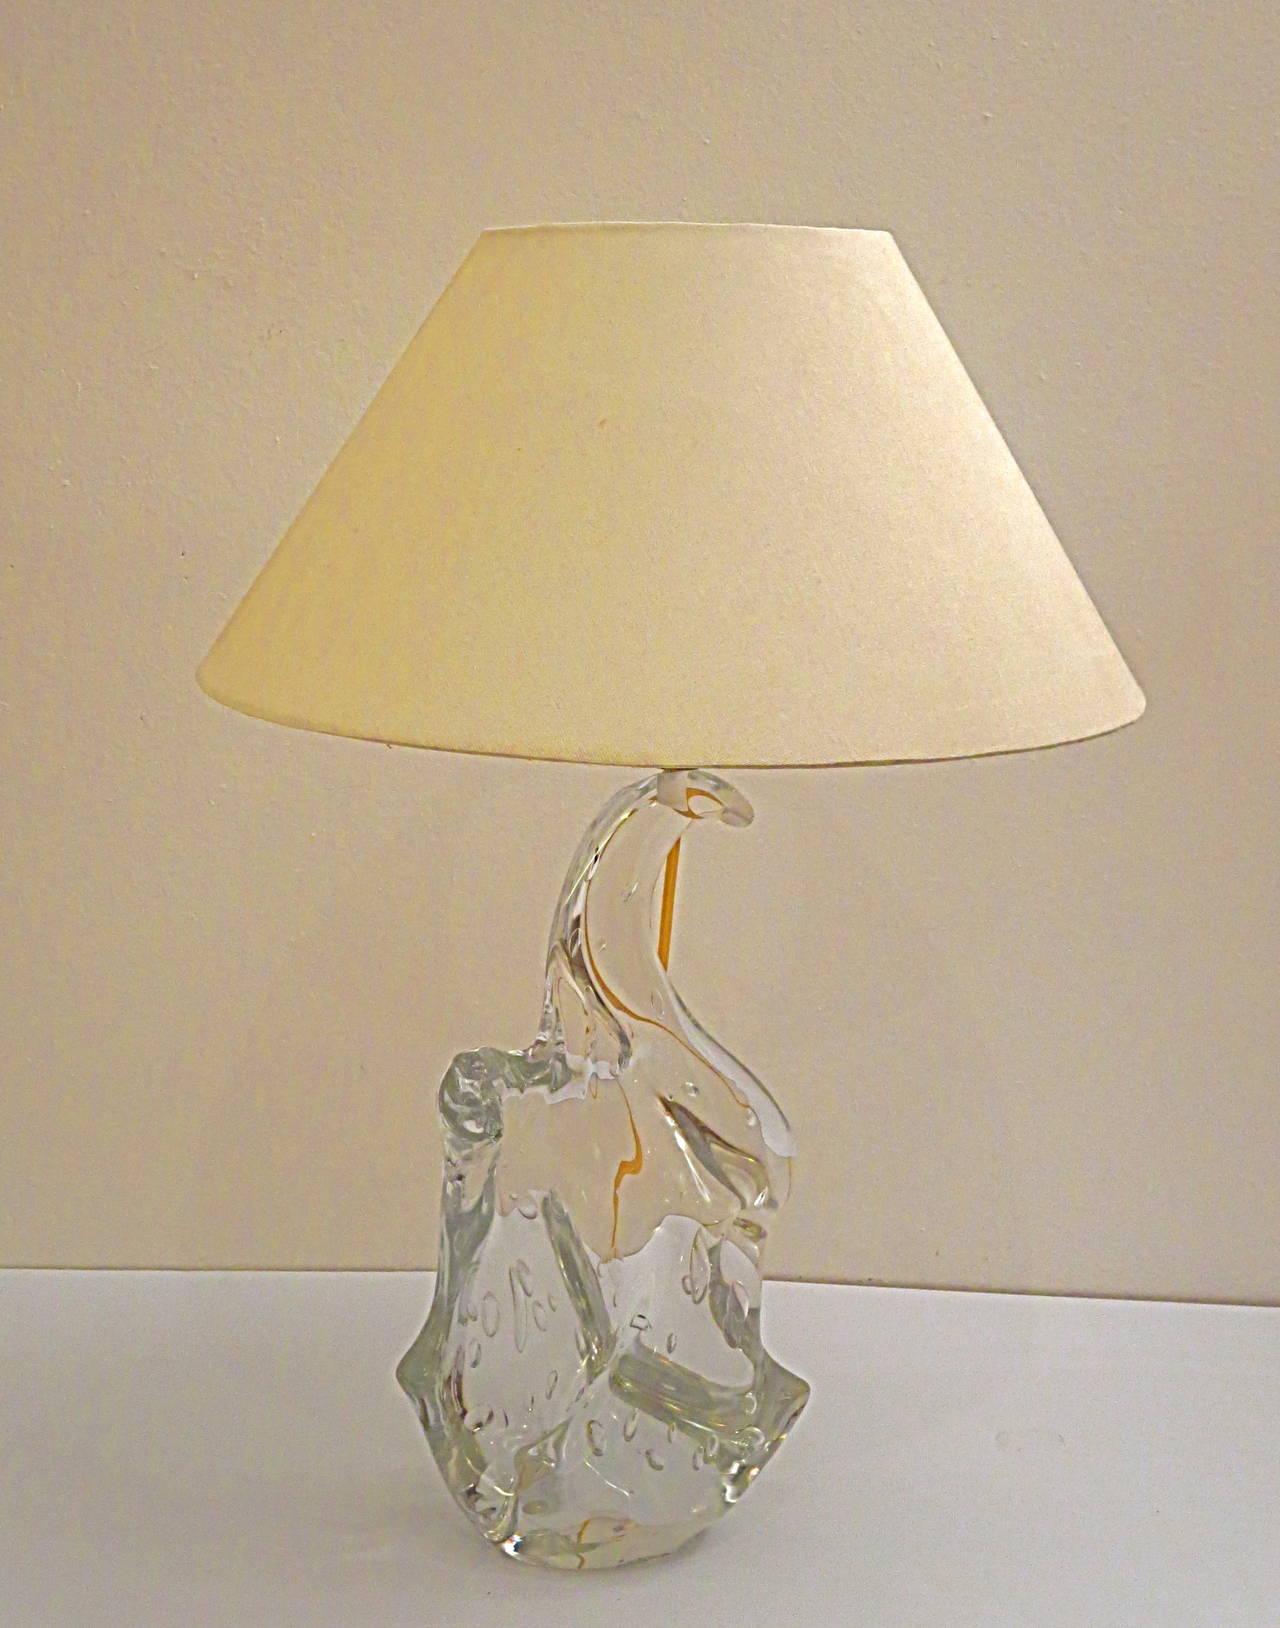 Beautiful abstract table glass lamp signed by Charles Schneider, circa 1930s, made in France, mouth blown bubble clear glass abstract figure, the lamp has been rewired with brass fittings and gold silk cord in great condition, no chips cracks or